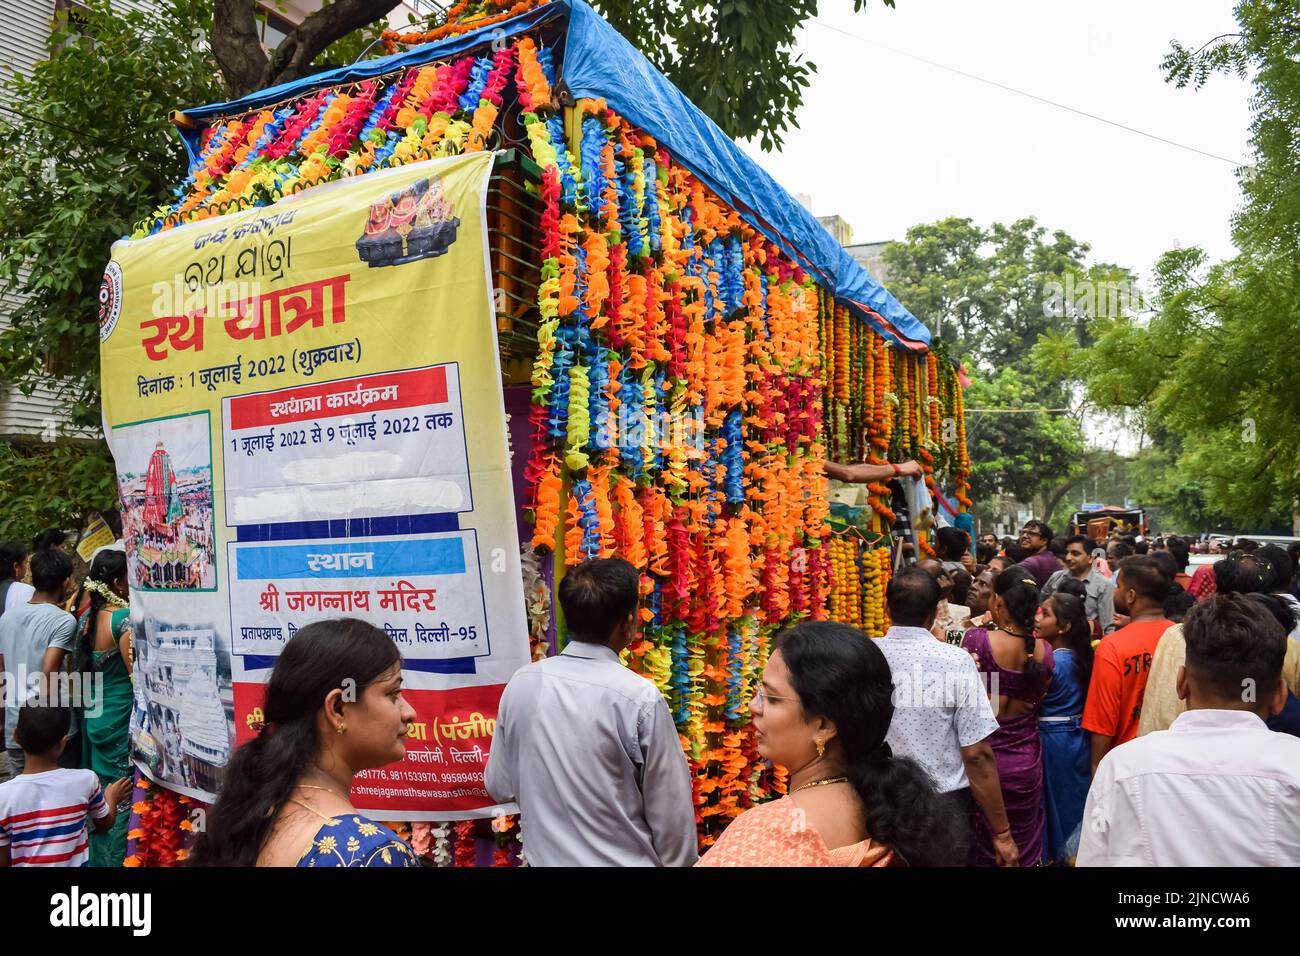 New Delhi, India July 01 2022 - A huge gathering of devotees from different parts of Delhi on the occasion of ratha yatra or rathyatra. Rath for Lord Stock Photo